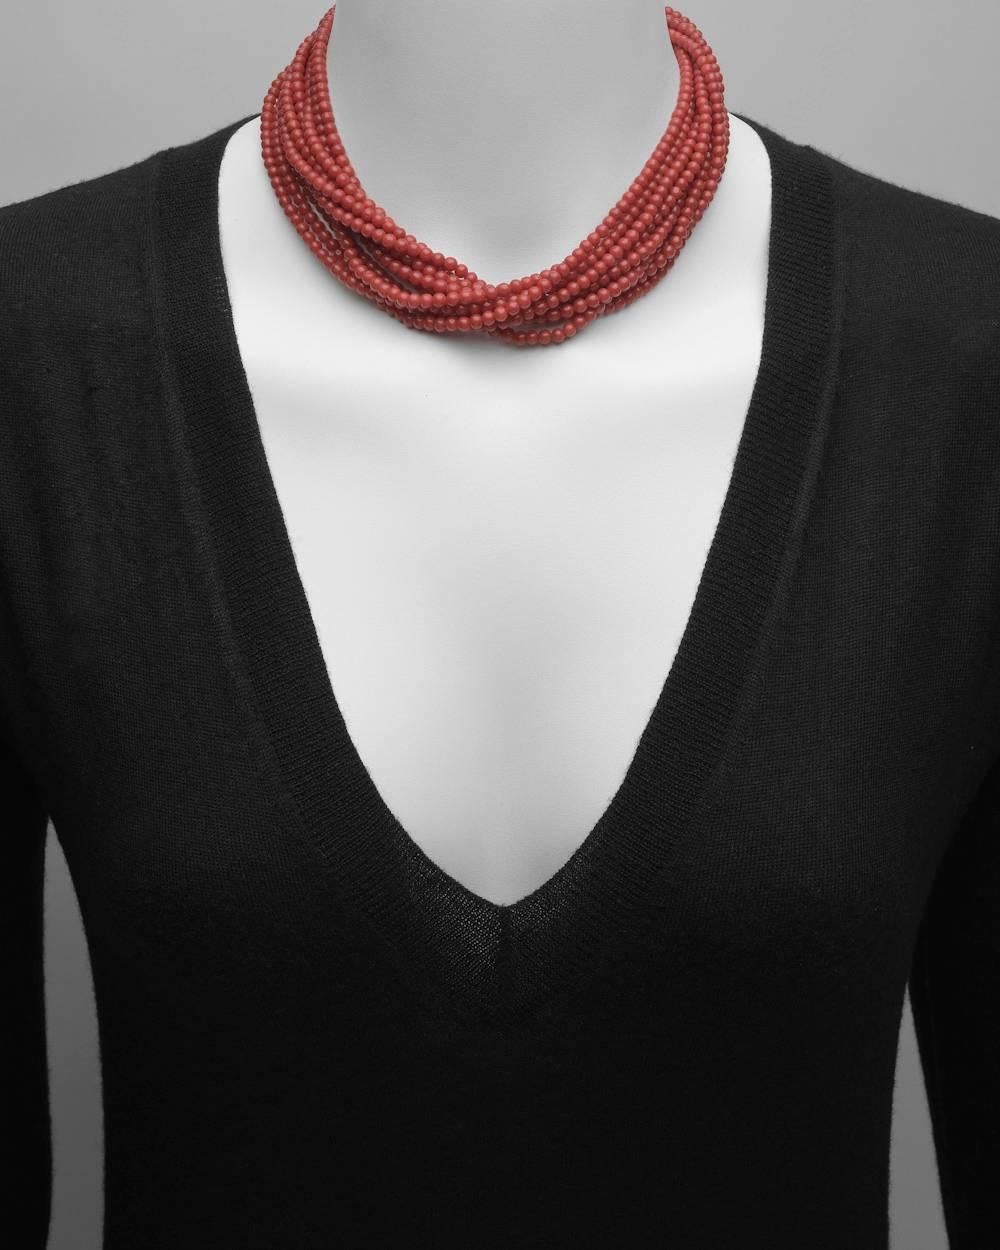 Torsade necklace, composed of ten strands of red coral beads each measuring approximately 3.5 to 4mm in diameter, the necklace secured by a 22k yellow gold clasp. 16